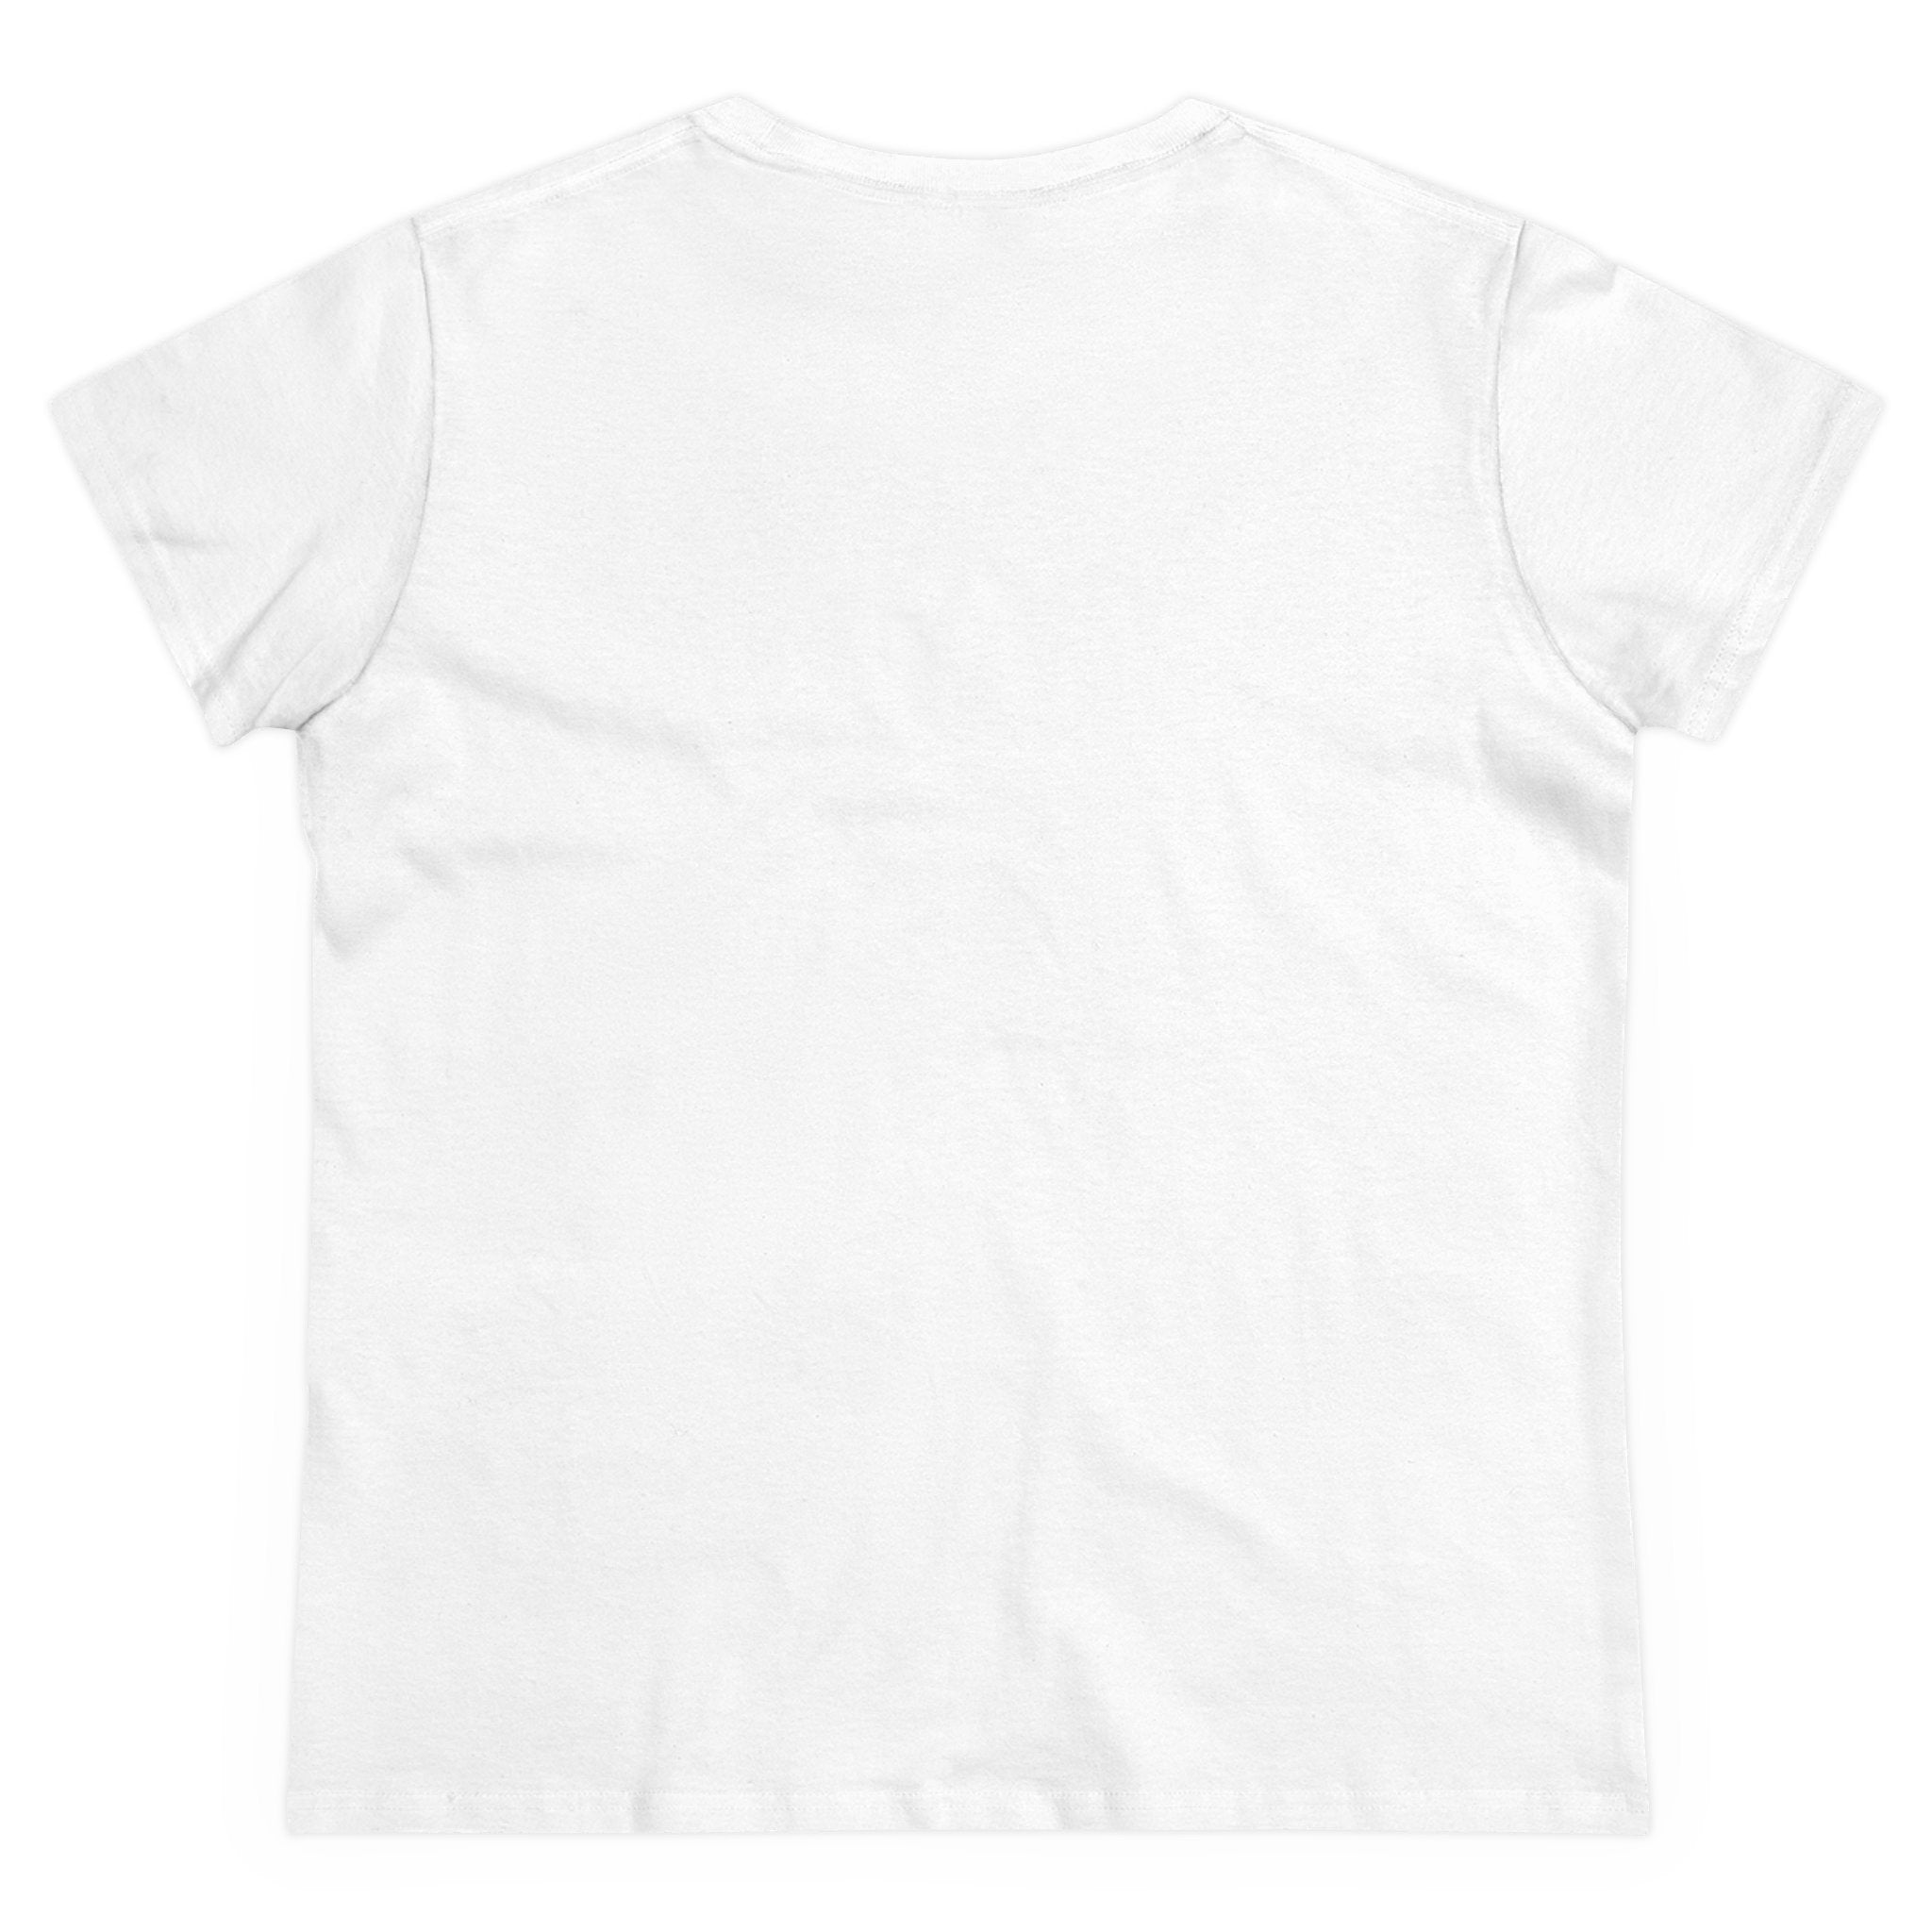 Back view of a RG-B - Women's Tee in plain white cotton, representing ethical fashion, on a white background.